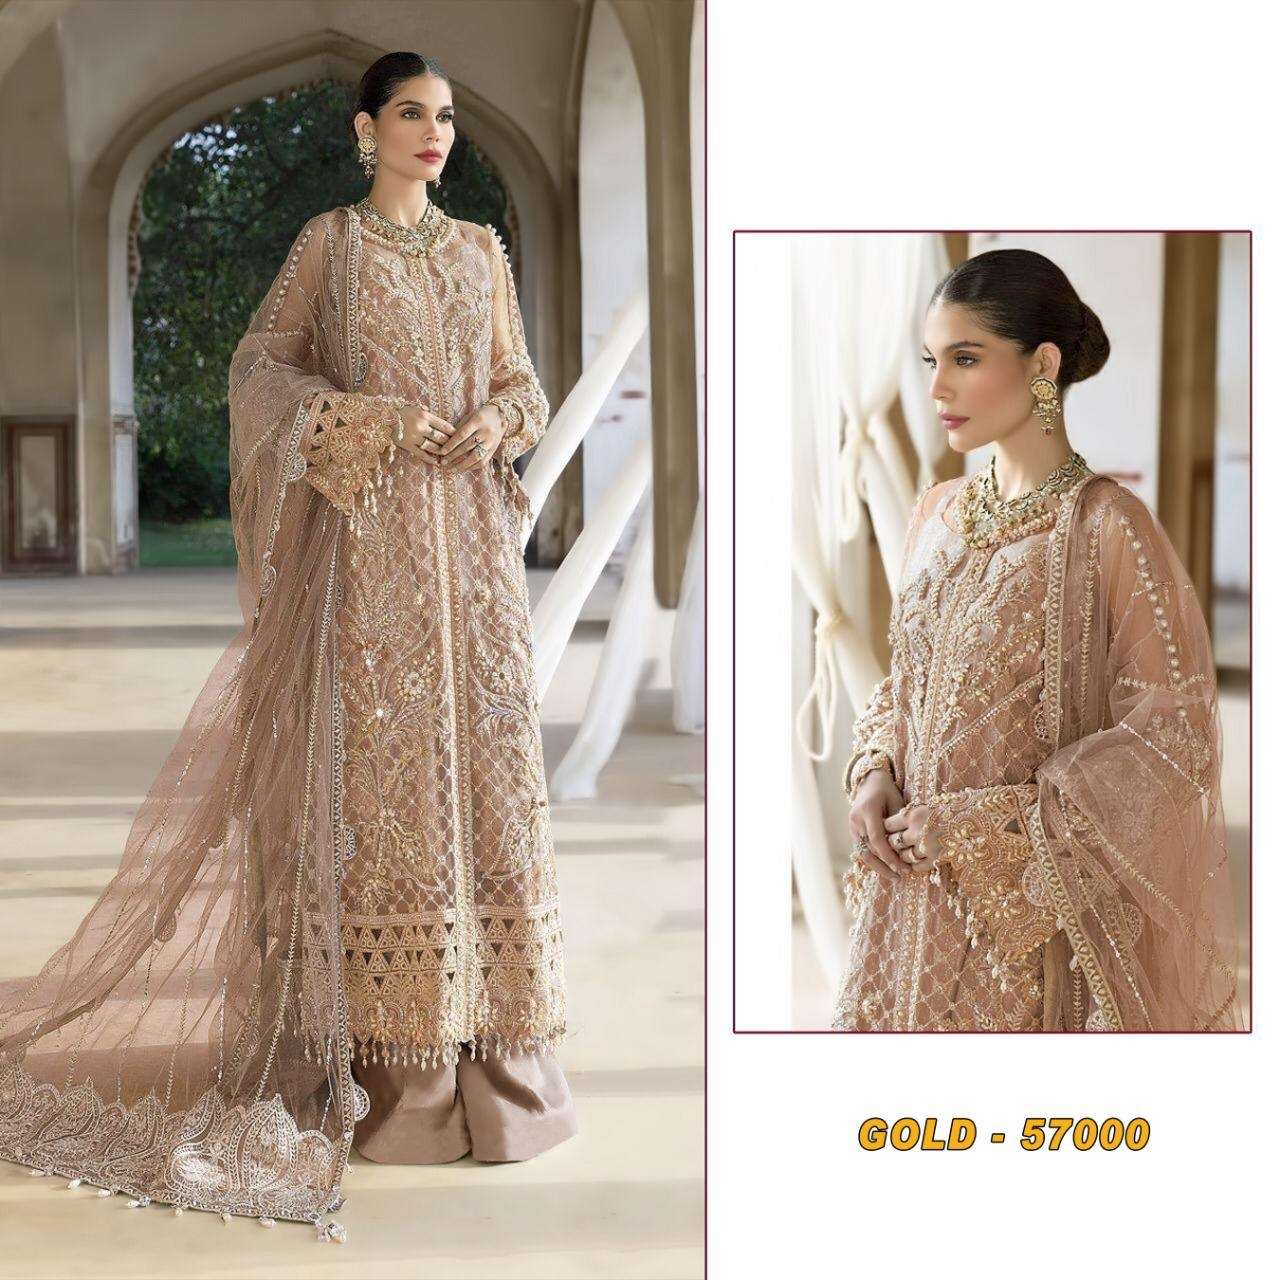 MARIA.B - 𝐌𝐚𝐫𝐢𝐚.𝐁. 𝐑𝐞𝐚𝐝𝐲-𝐓𝐨-𝐖𝐞𝐚𝐫 𝐅𝐨𝐫𝐦𝐚𝐥𝐬 A new era  of embellished formals with a signature femininity showcased through  graceful designs! Product Code: SF-W22-24 Available Now In-Stores & Online  at https://www.mariab.pk/ready ...